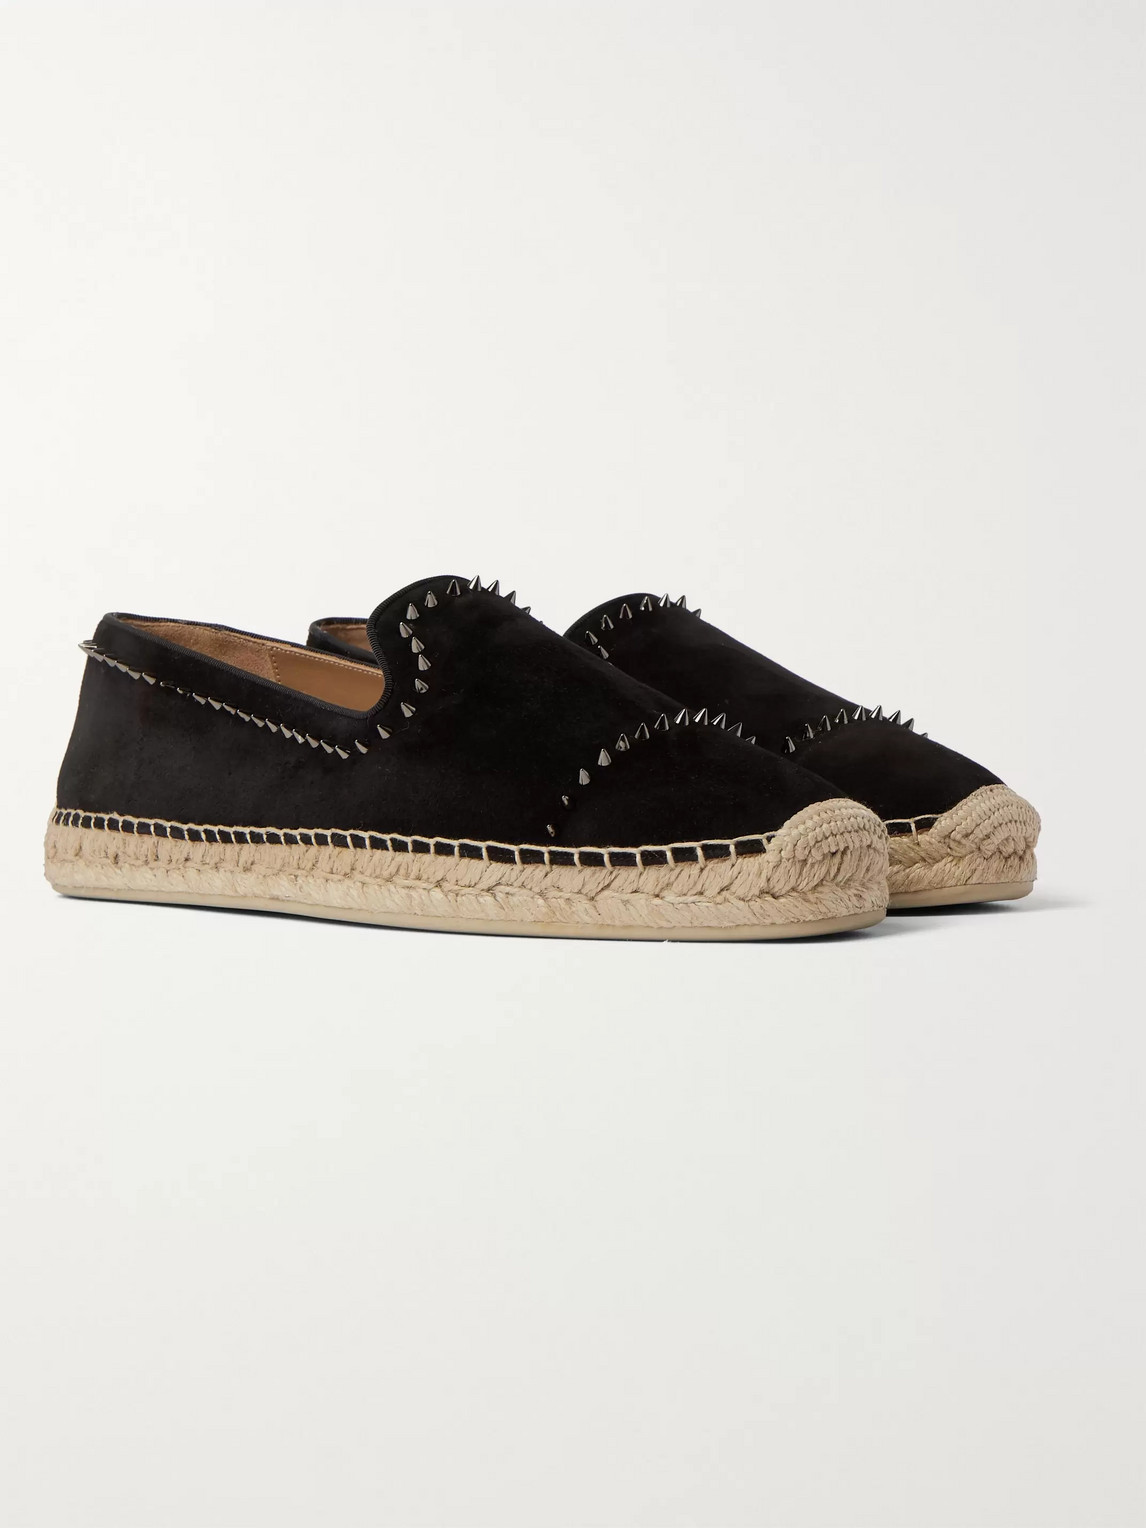 Christian Louboutin Spiked Grosgrain-trimmed Suede Espadrilles In Black